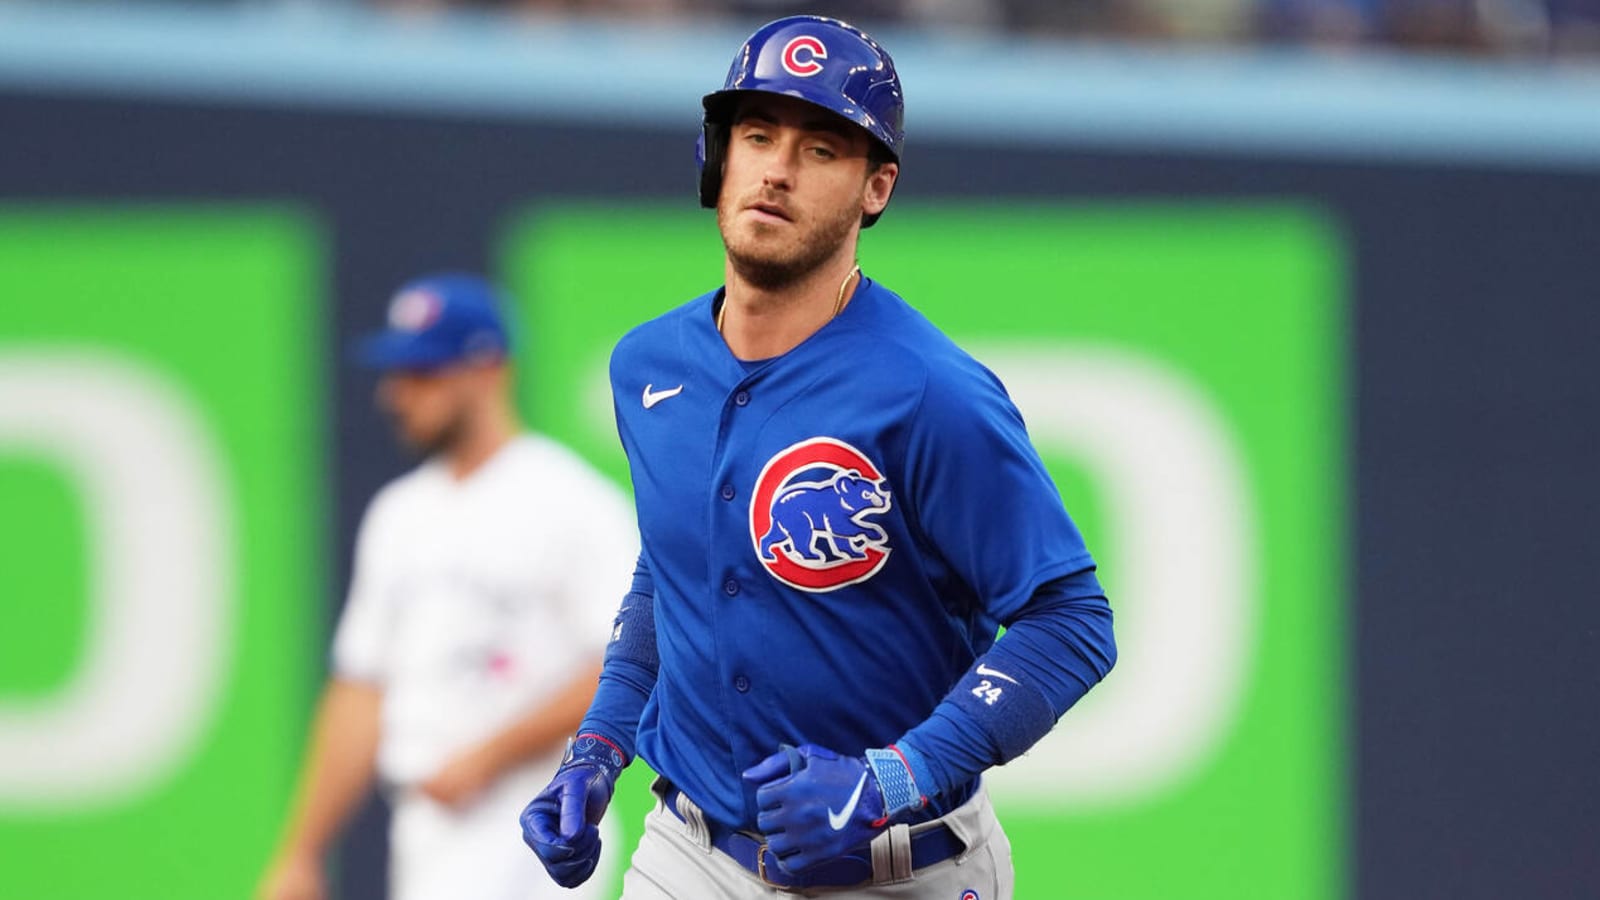 Cubs star could be looking at major contract this offseason